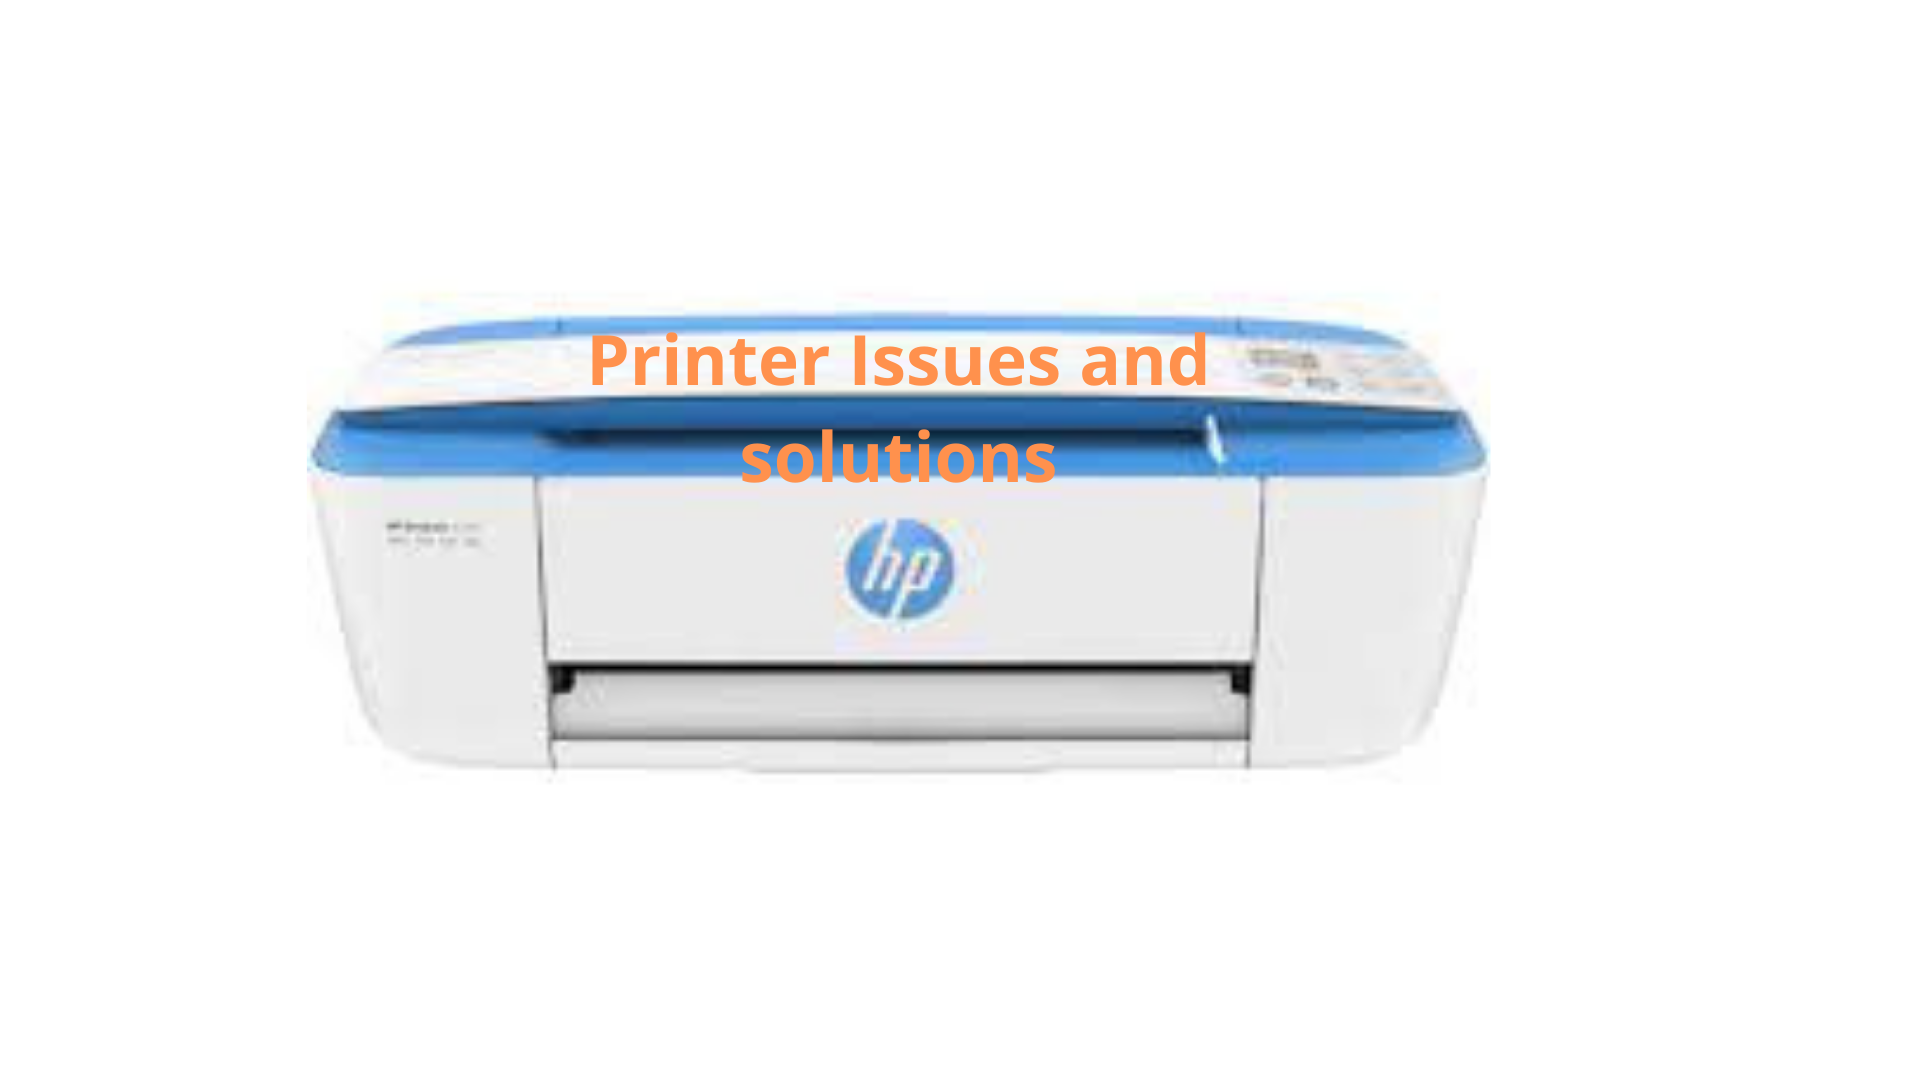 Printer Issues and solutions